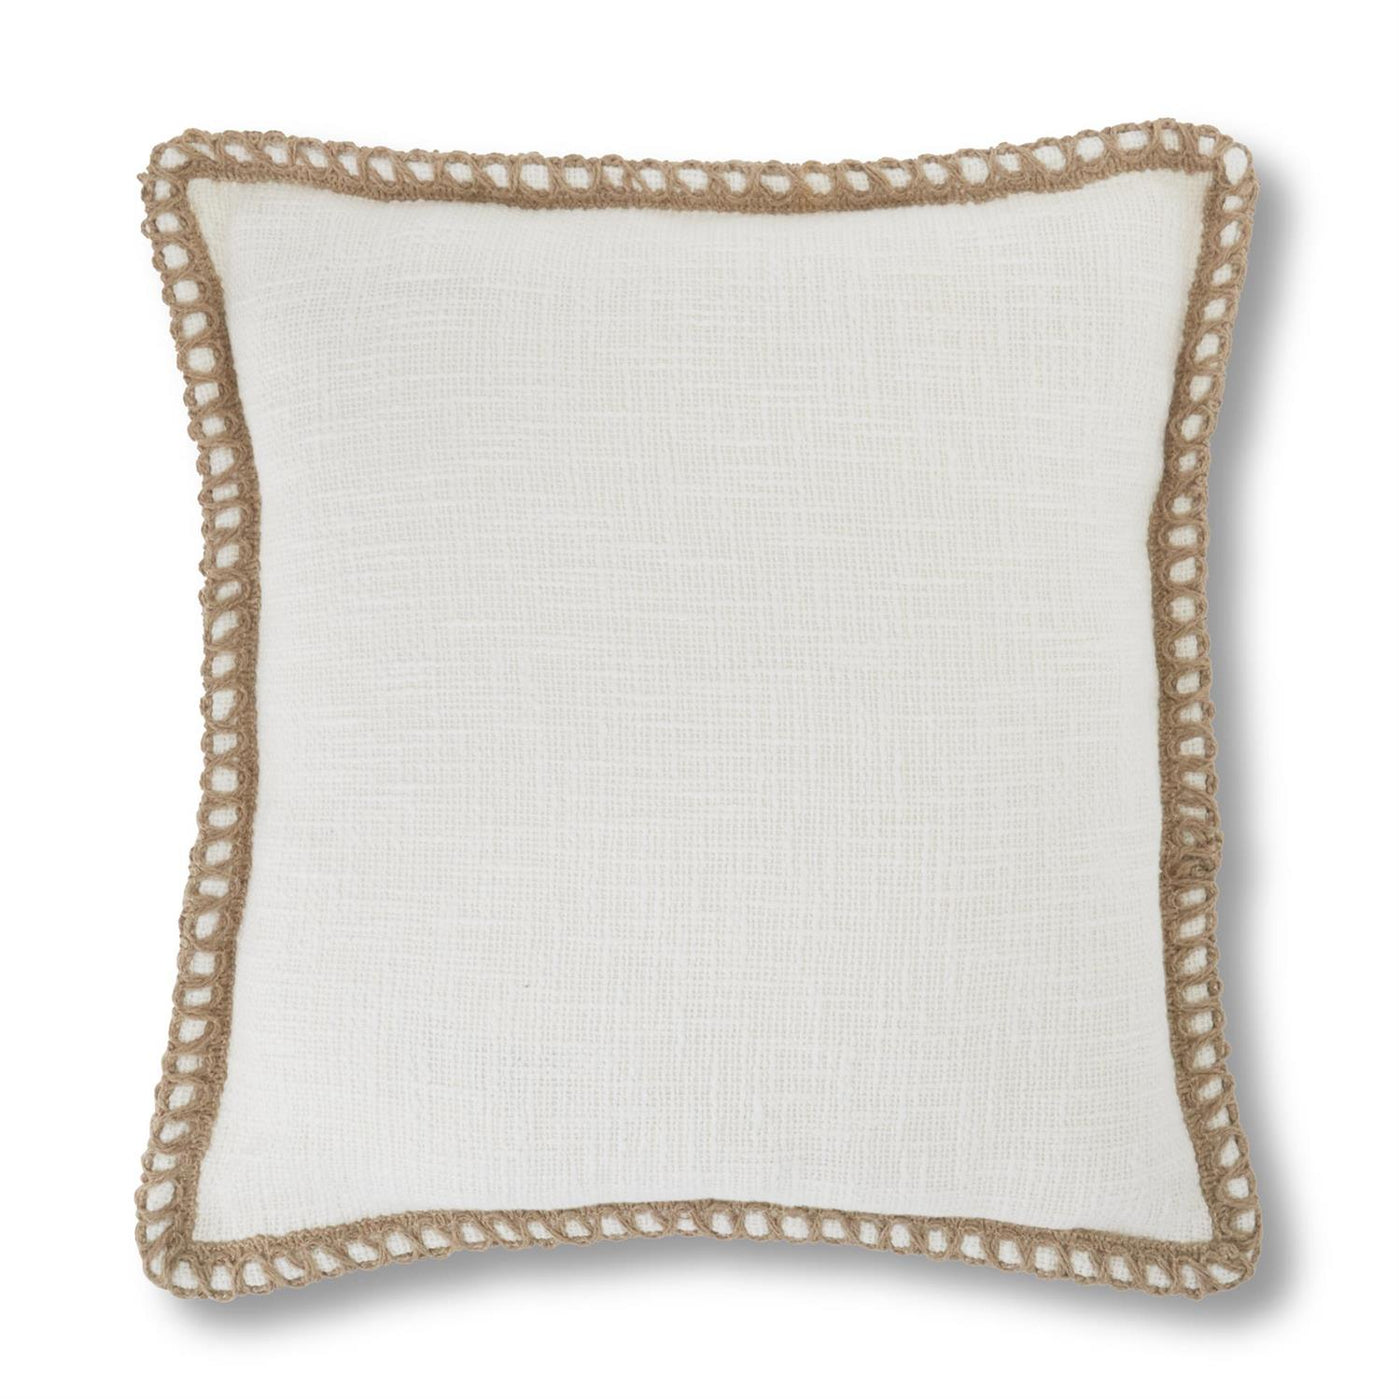 Woven Cream Cotton Throw Pillow with Loop Flange